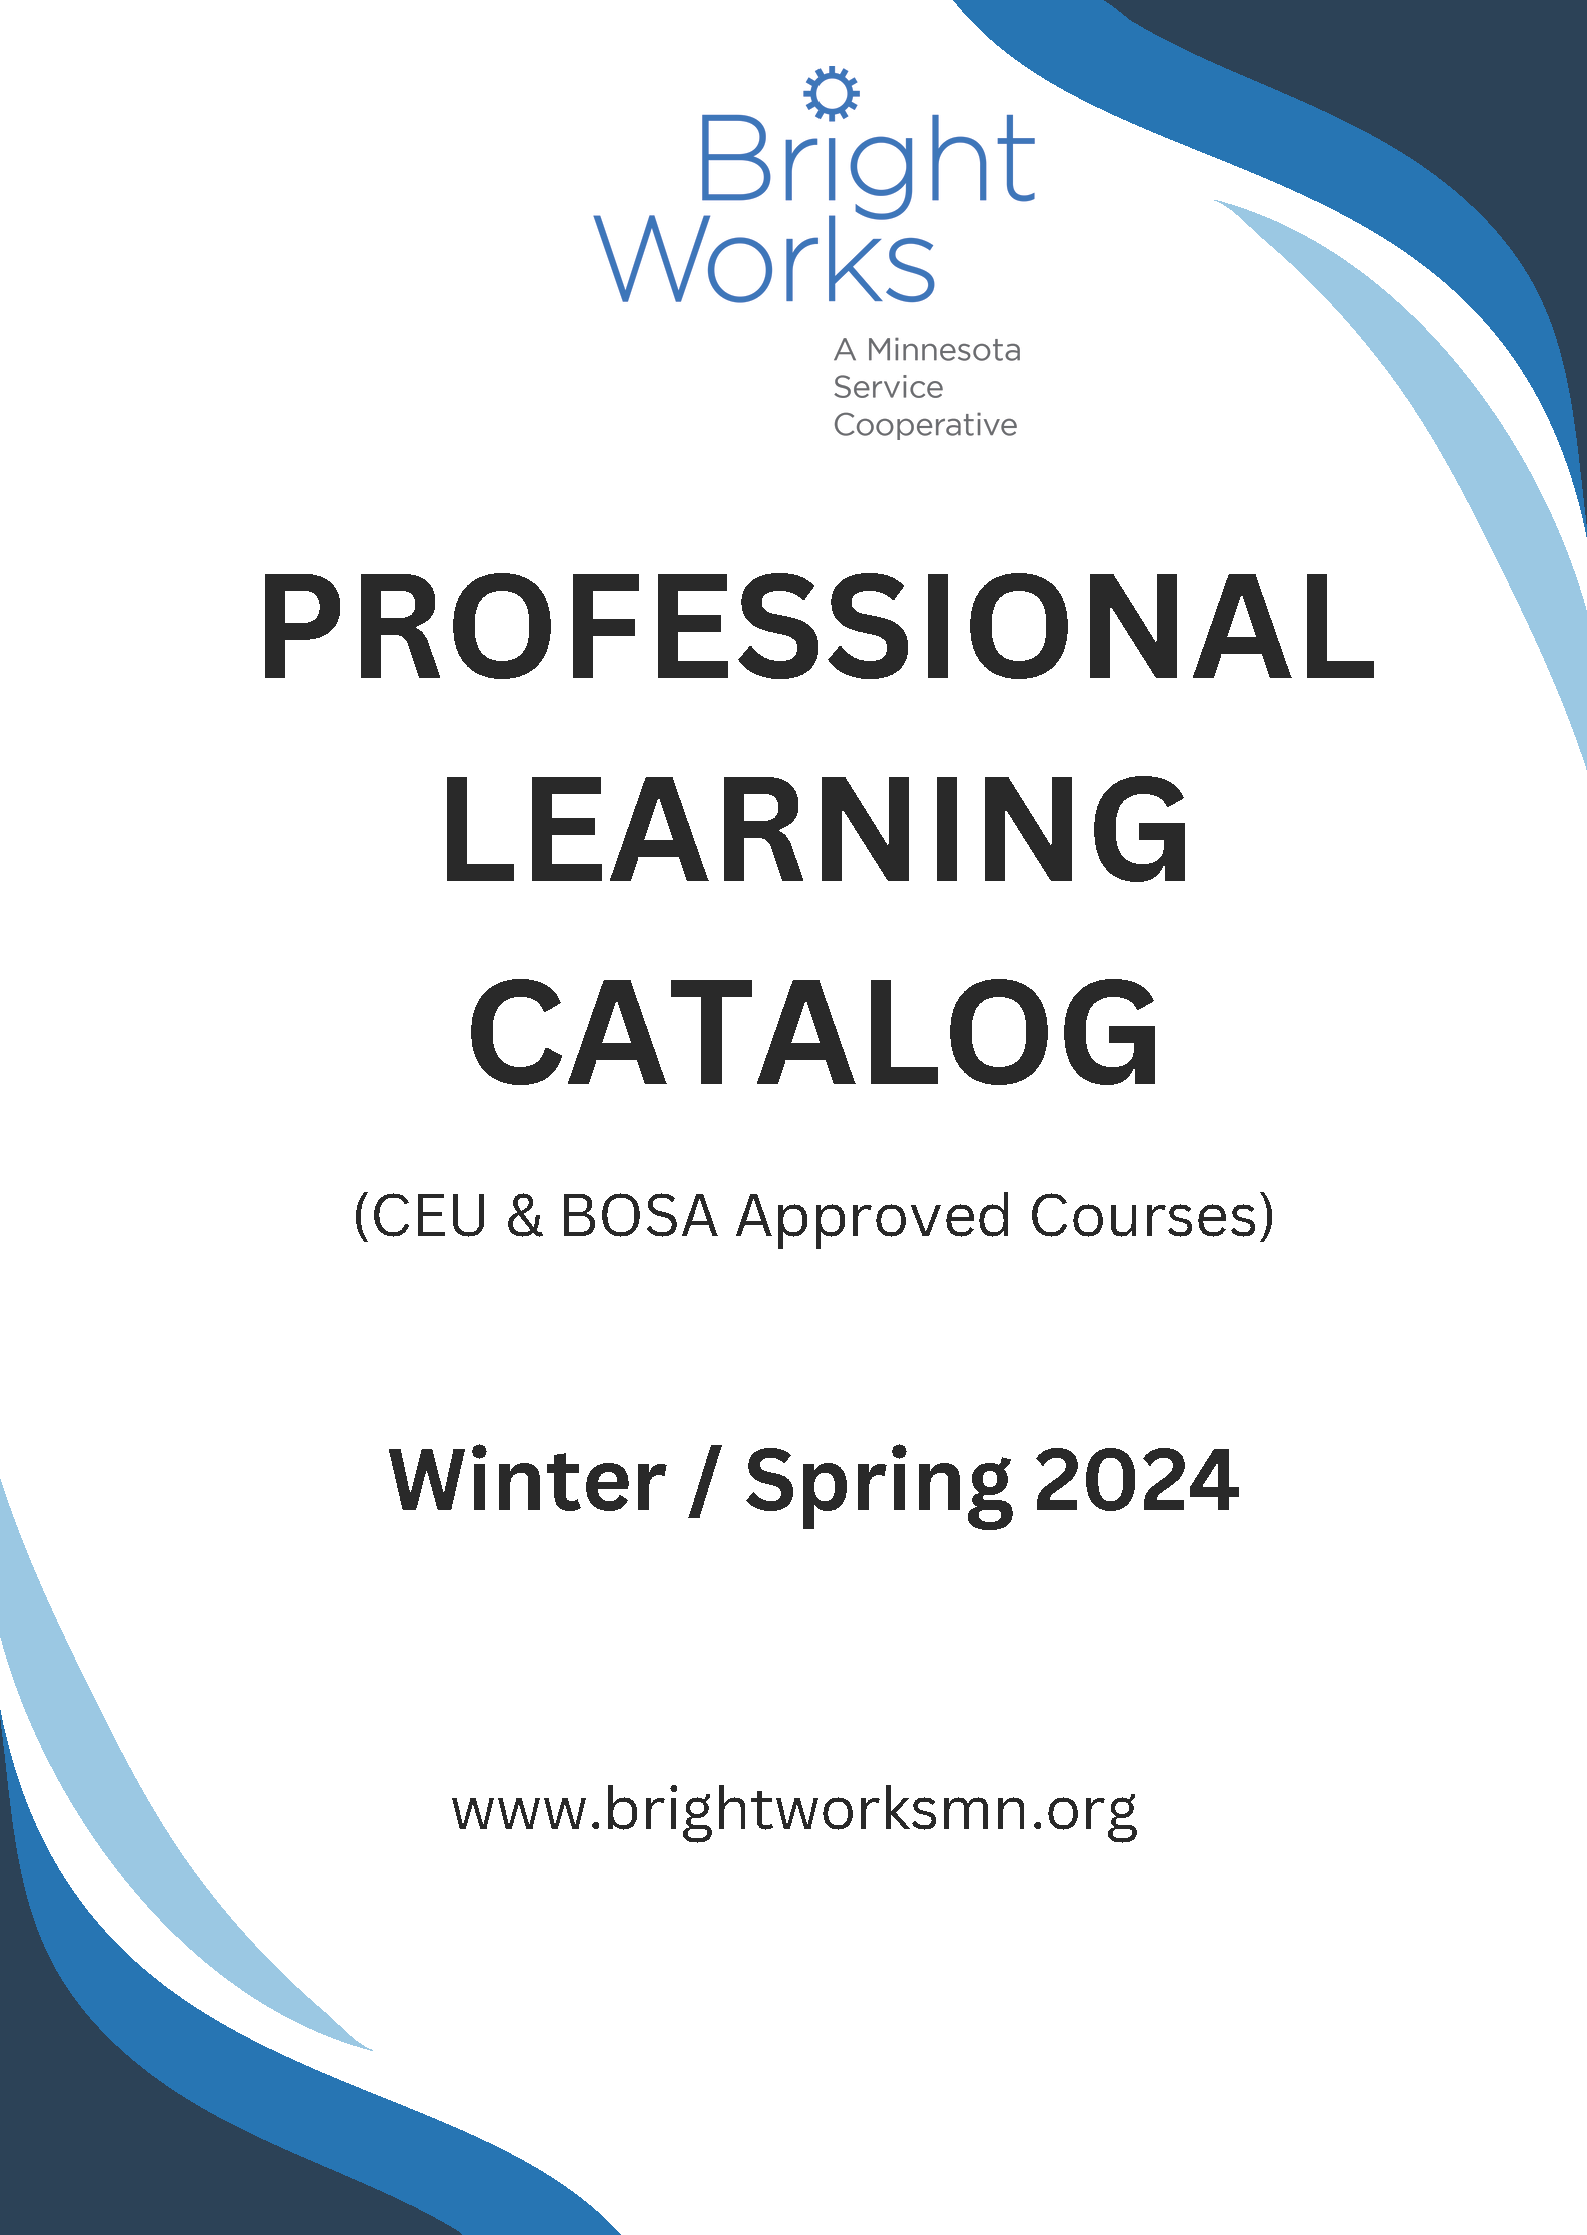 BrightWorks Professional Learning Catalog Winter/Spring 2024